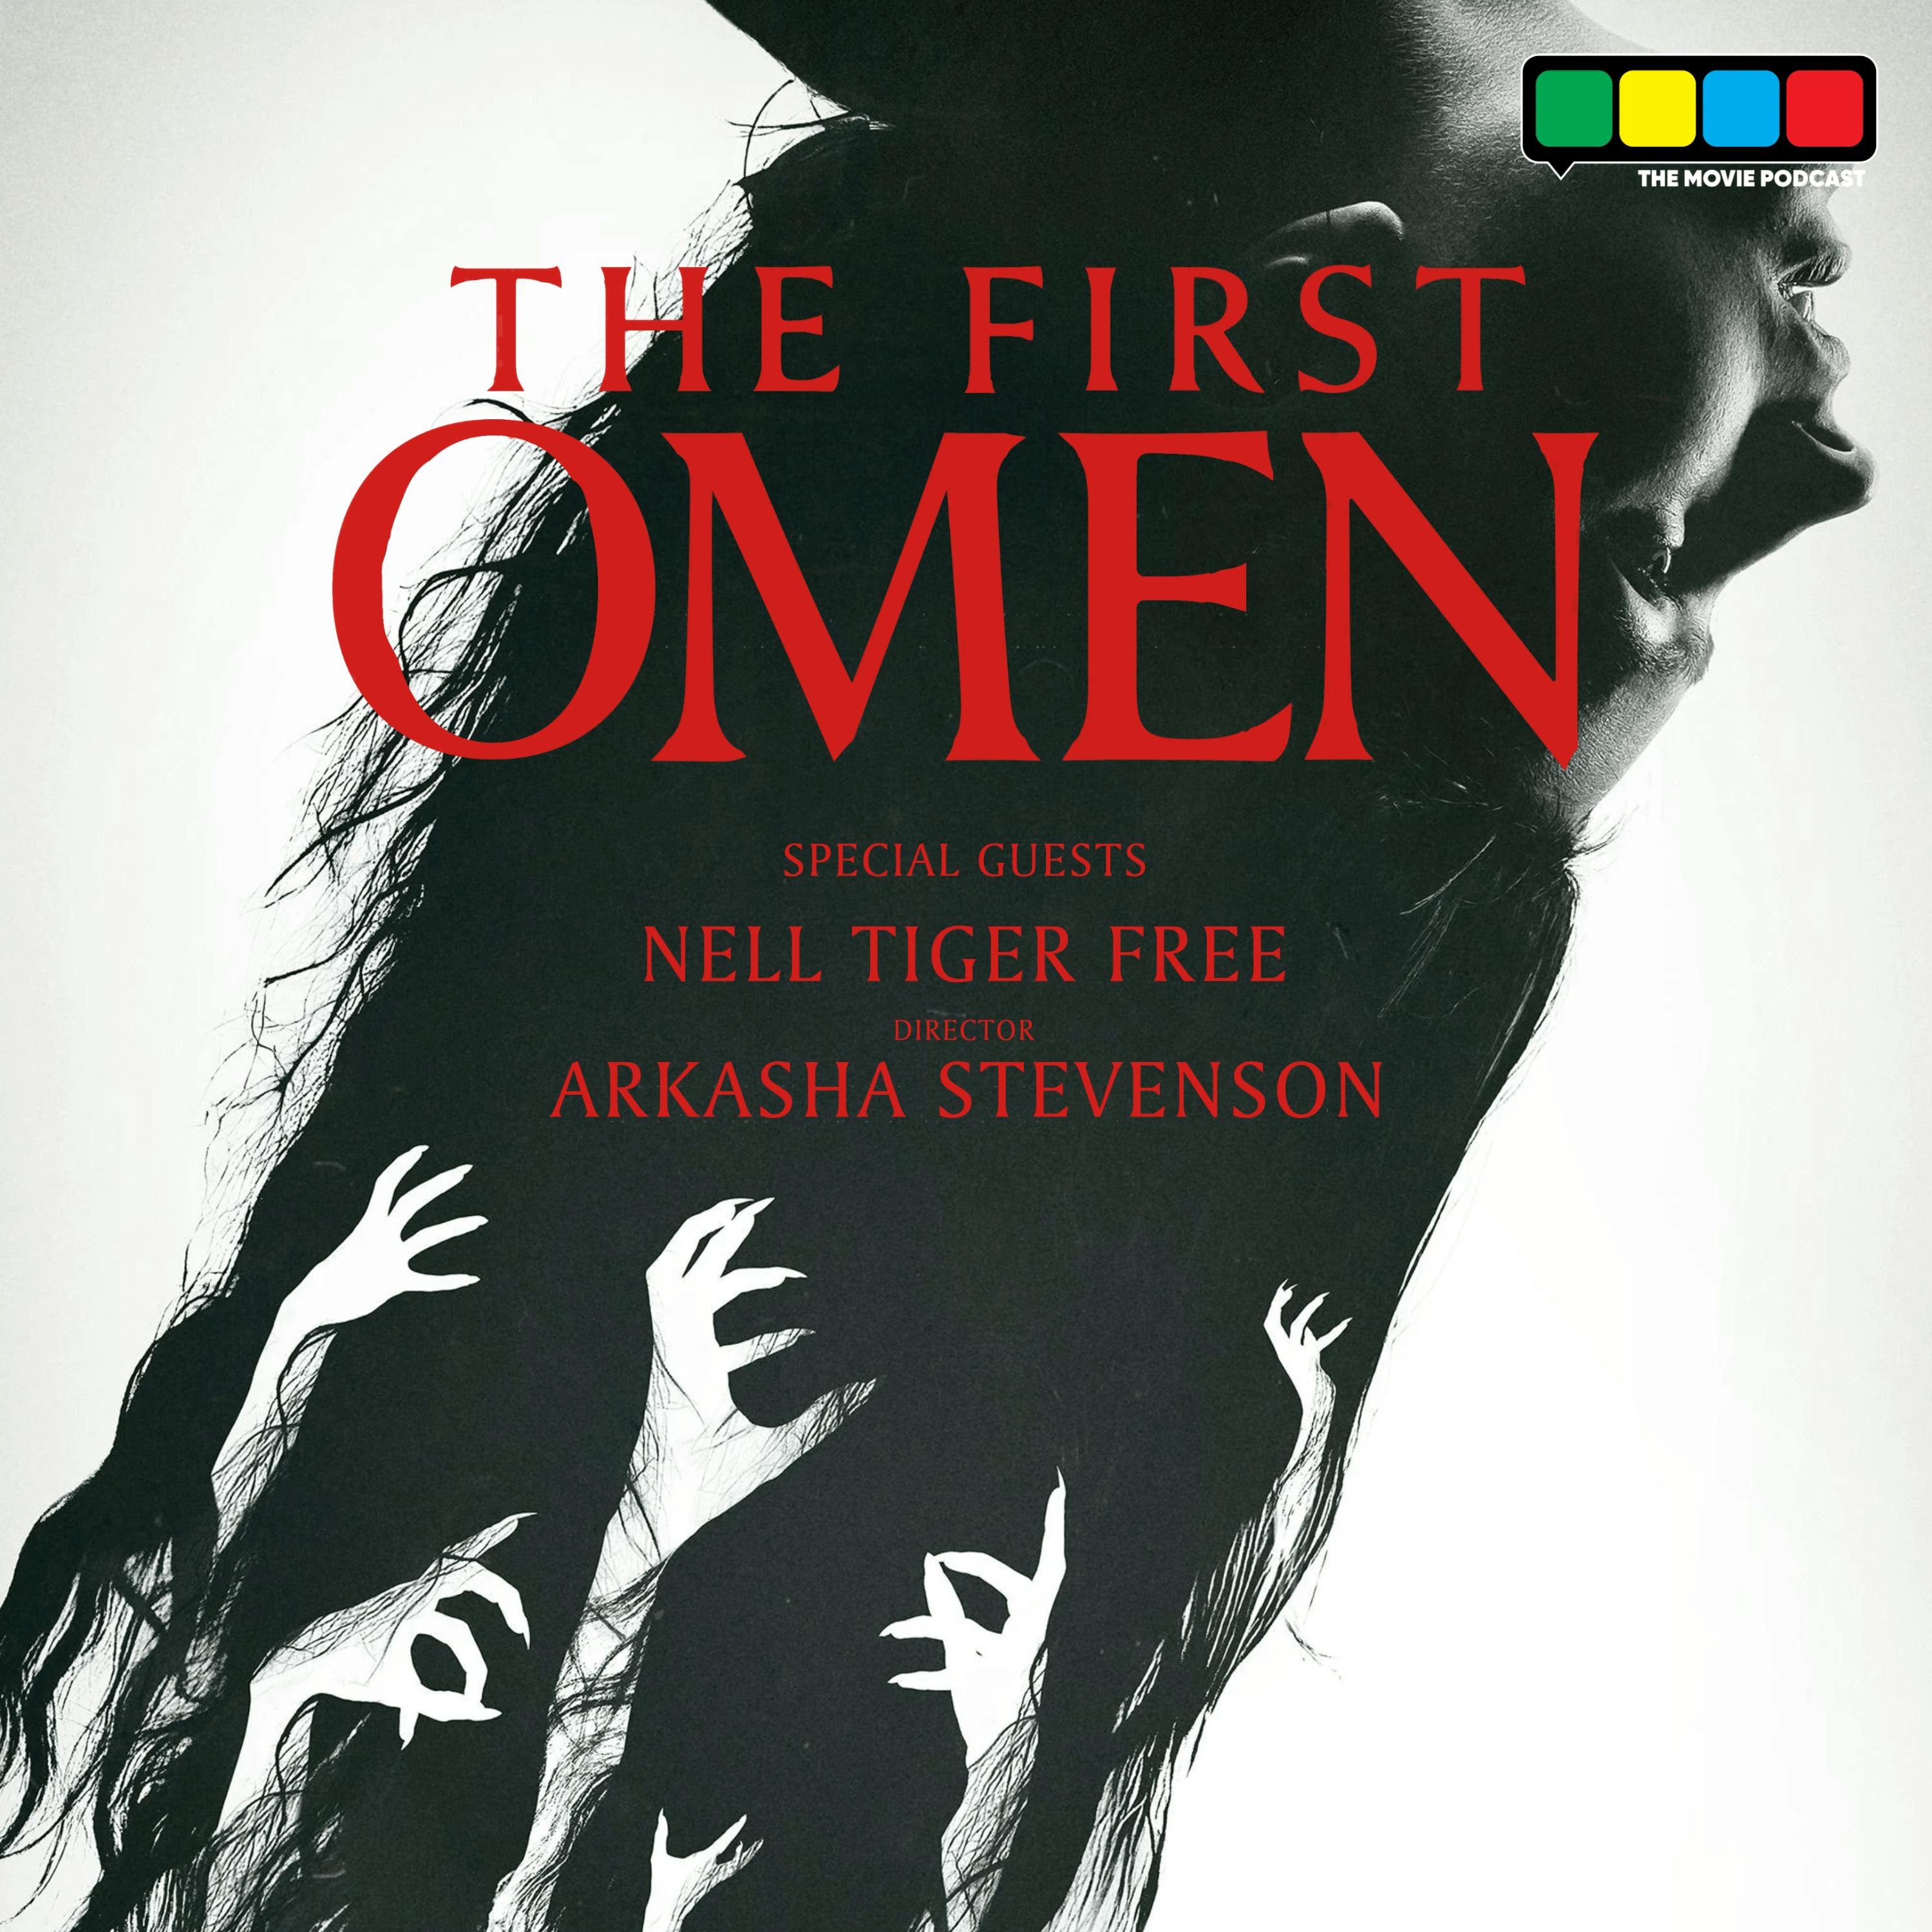 The First Omen Interview with Nell Tiger Free and Director Arkasha Stevenson